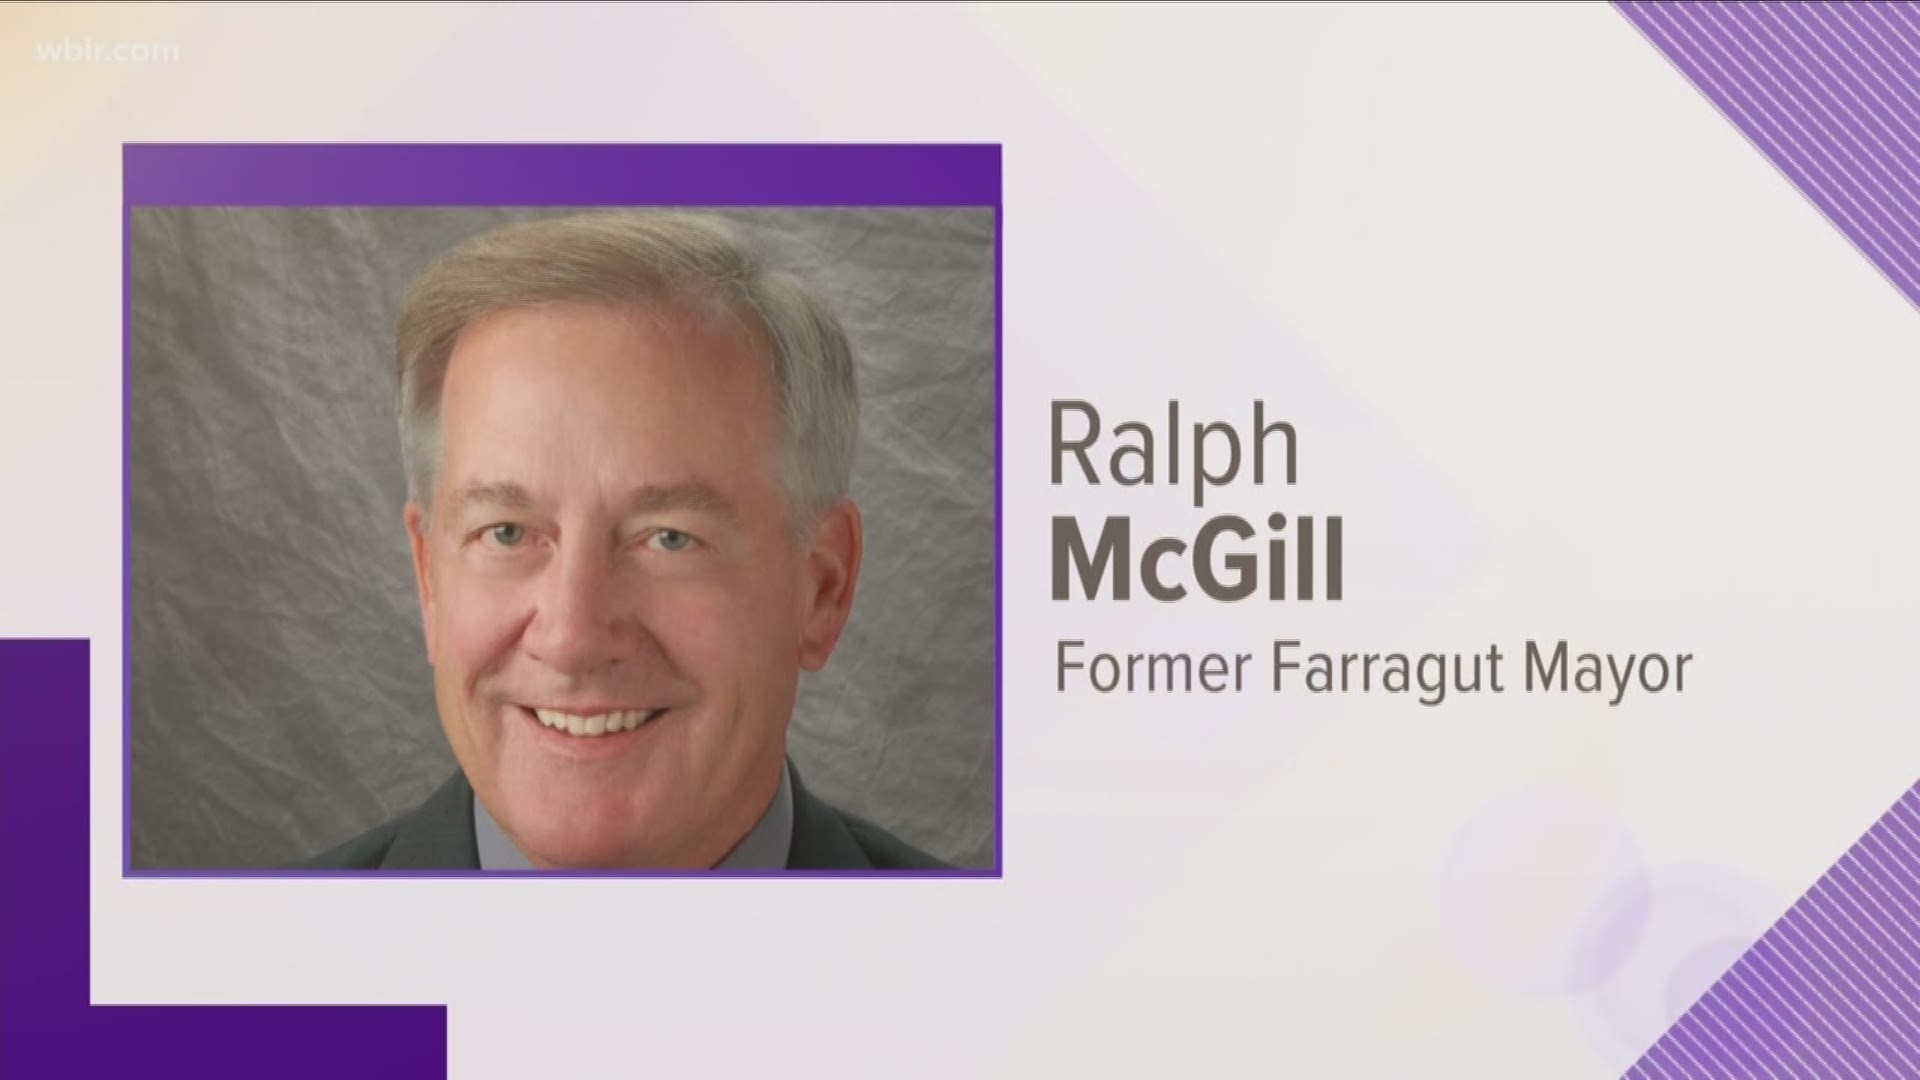 Dr. Ralph McGill passed away at age 74 just days after he retired from his long time role as Farragut Mayor. McGill is survived by his wife, two children and four grandchildren. June 26, 2018.